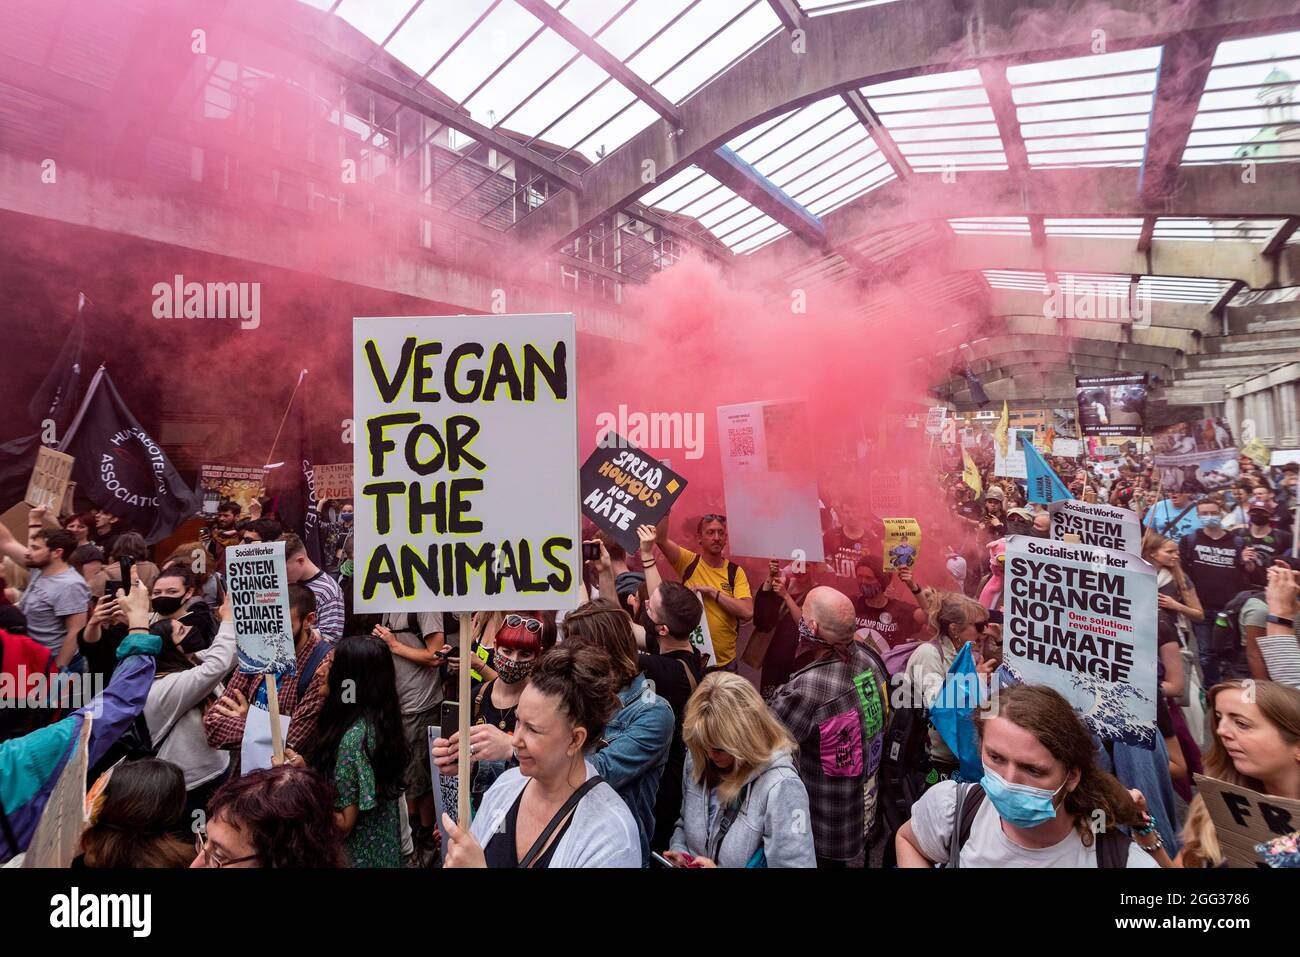 London, UK.  28 August 2021.  Climate activists from Extinction Rebellion begin an Animal Rights March at Smithfield Market.  The event is part of the two week ‘Impossible Rebellion’ protest to “target the root cause of the climate and ecological crisis”. Credit: Stephen Chung / Alamy Live News Stock Photo